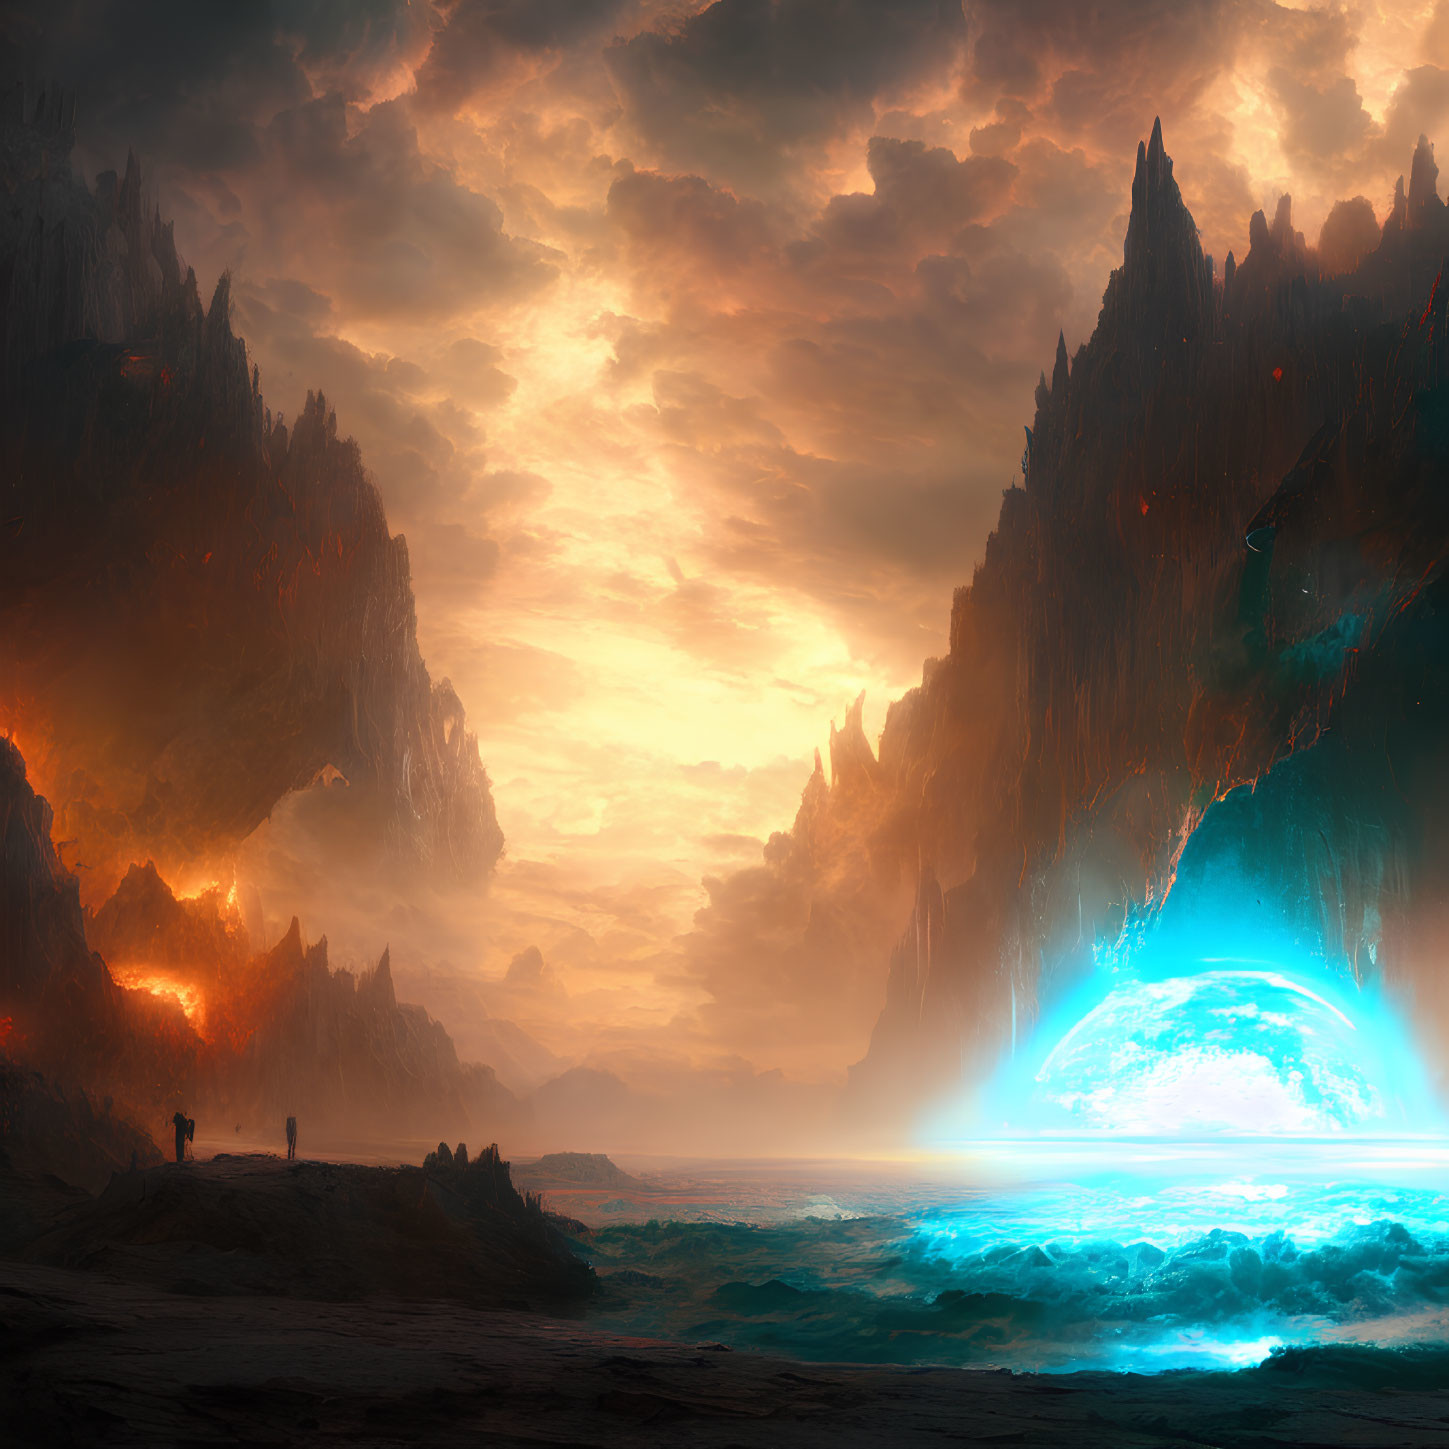 Majestic cliffs, glowing sunset, portal on water, figures in silhouette